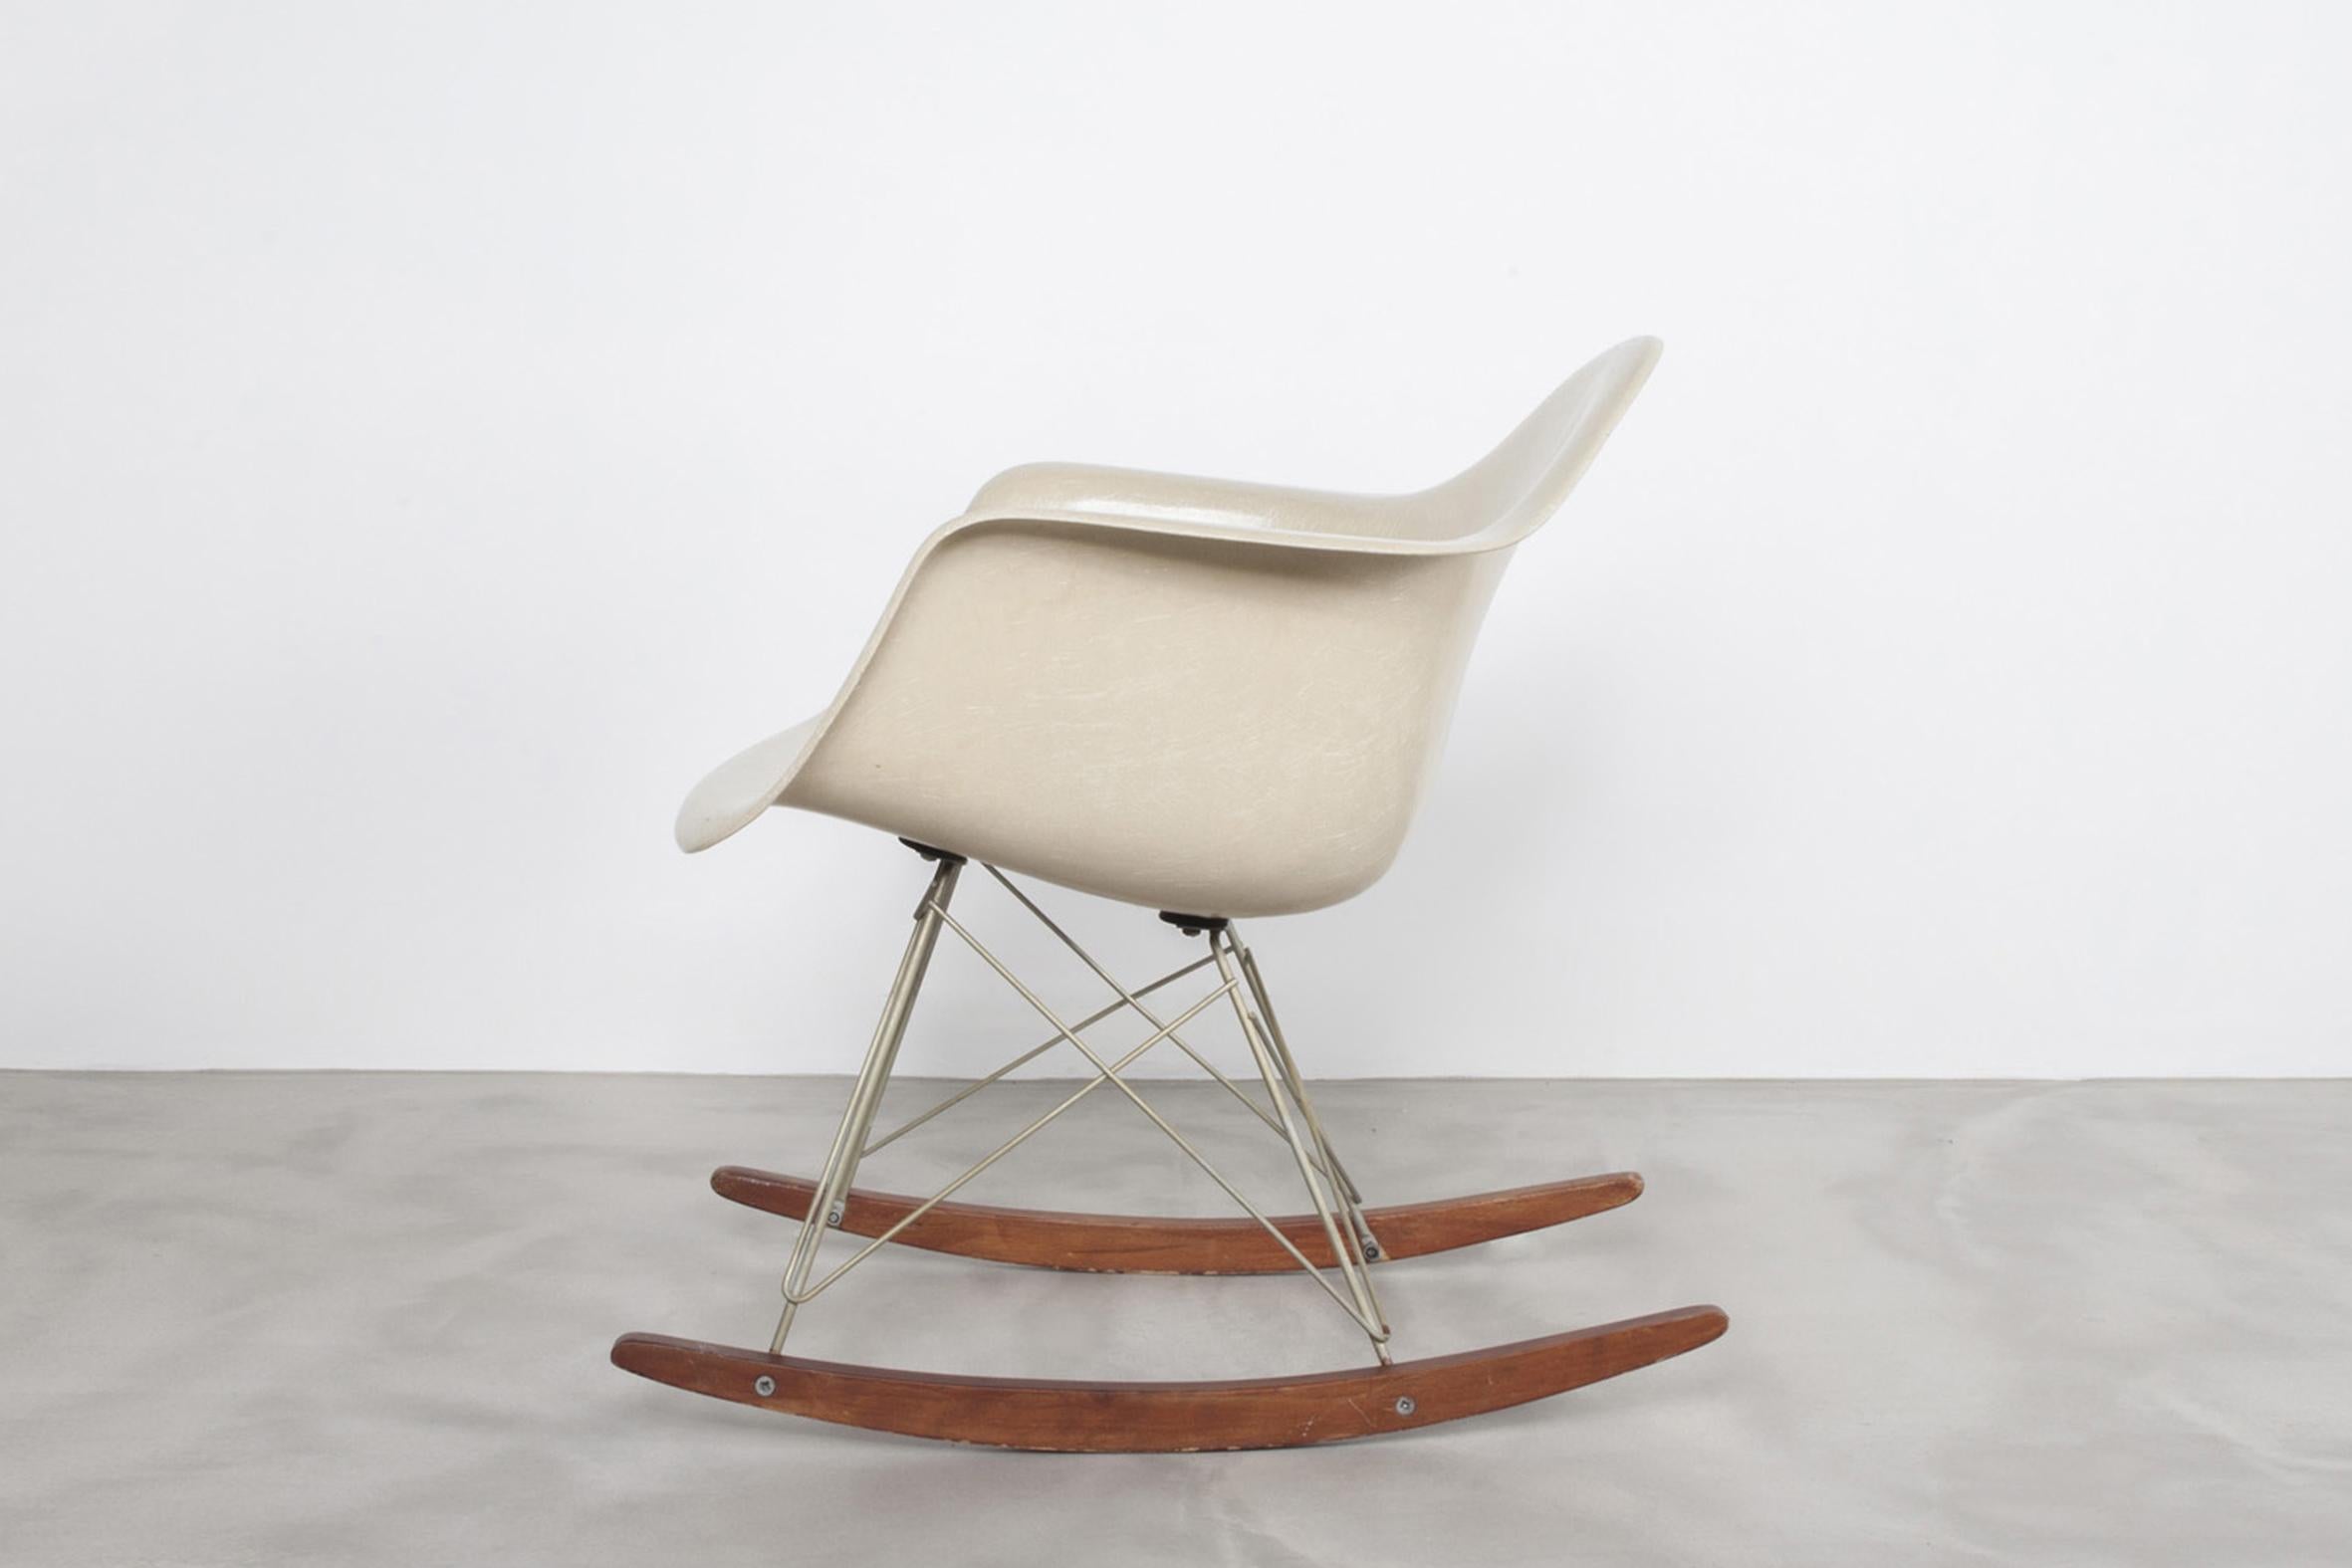 RAR Rocking chair with a parchment color fiberglass shell, with a metal base and birch runners.
Manufactured for Herman Miller.